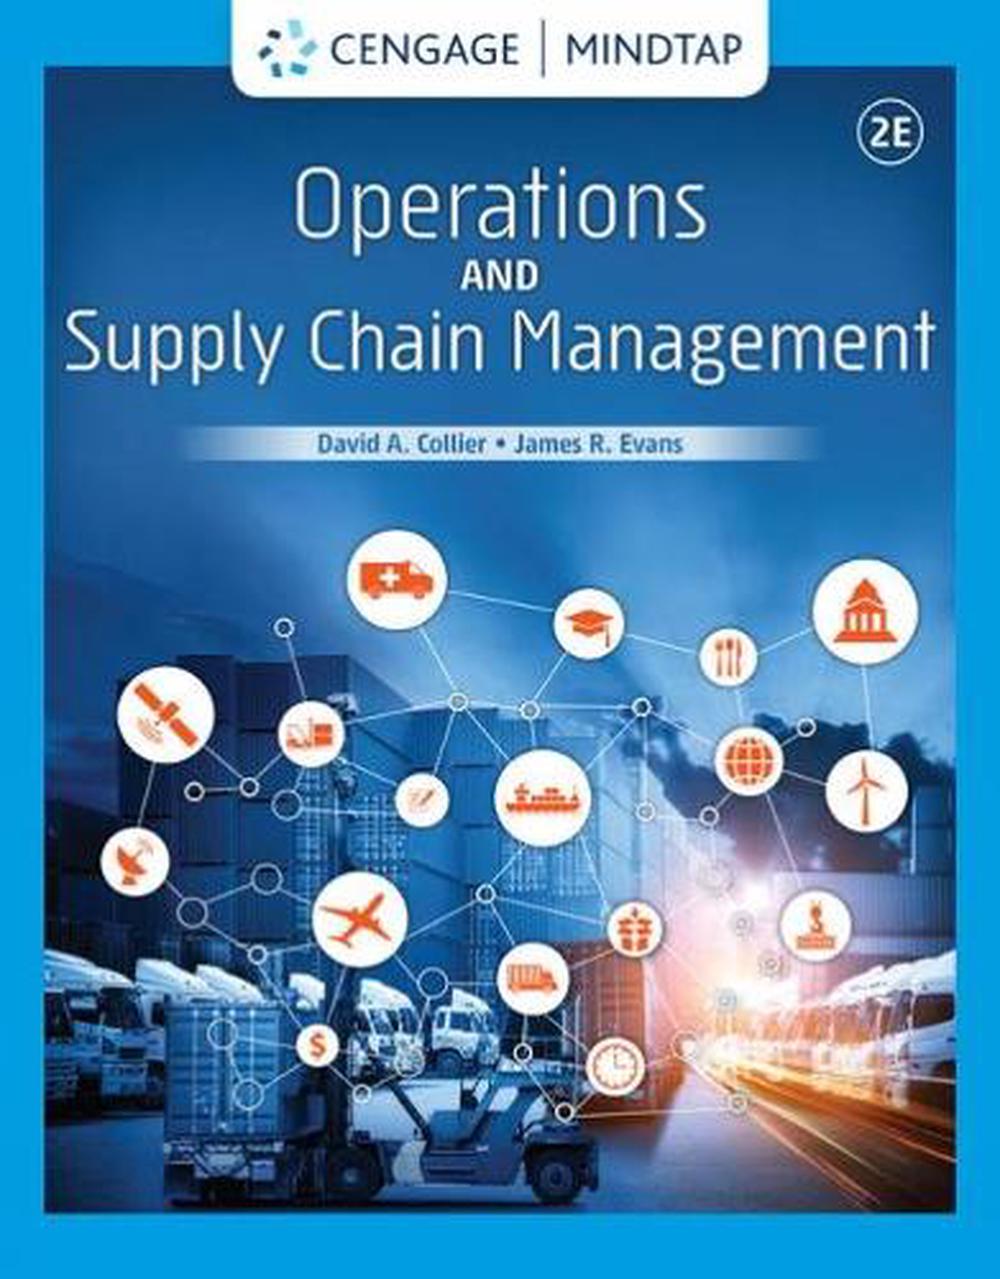 Chain　The　Operations　at　Supply　Collier,　9780357131695　and　by　online　Buy　Management,　2nd　Hardcover,　Edition　David　Nile